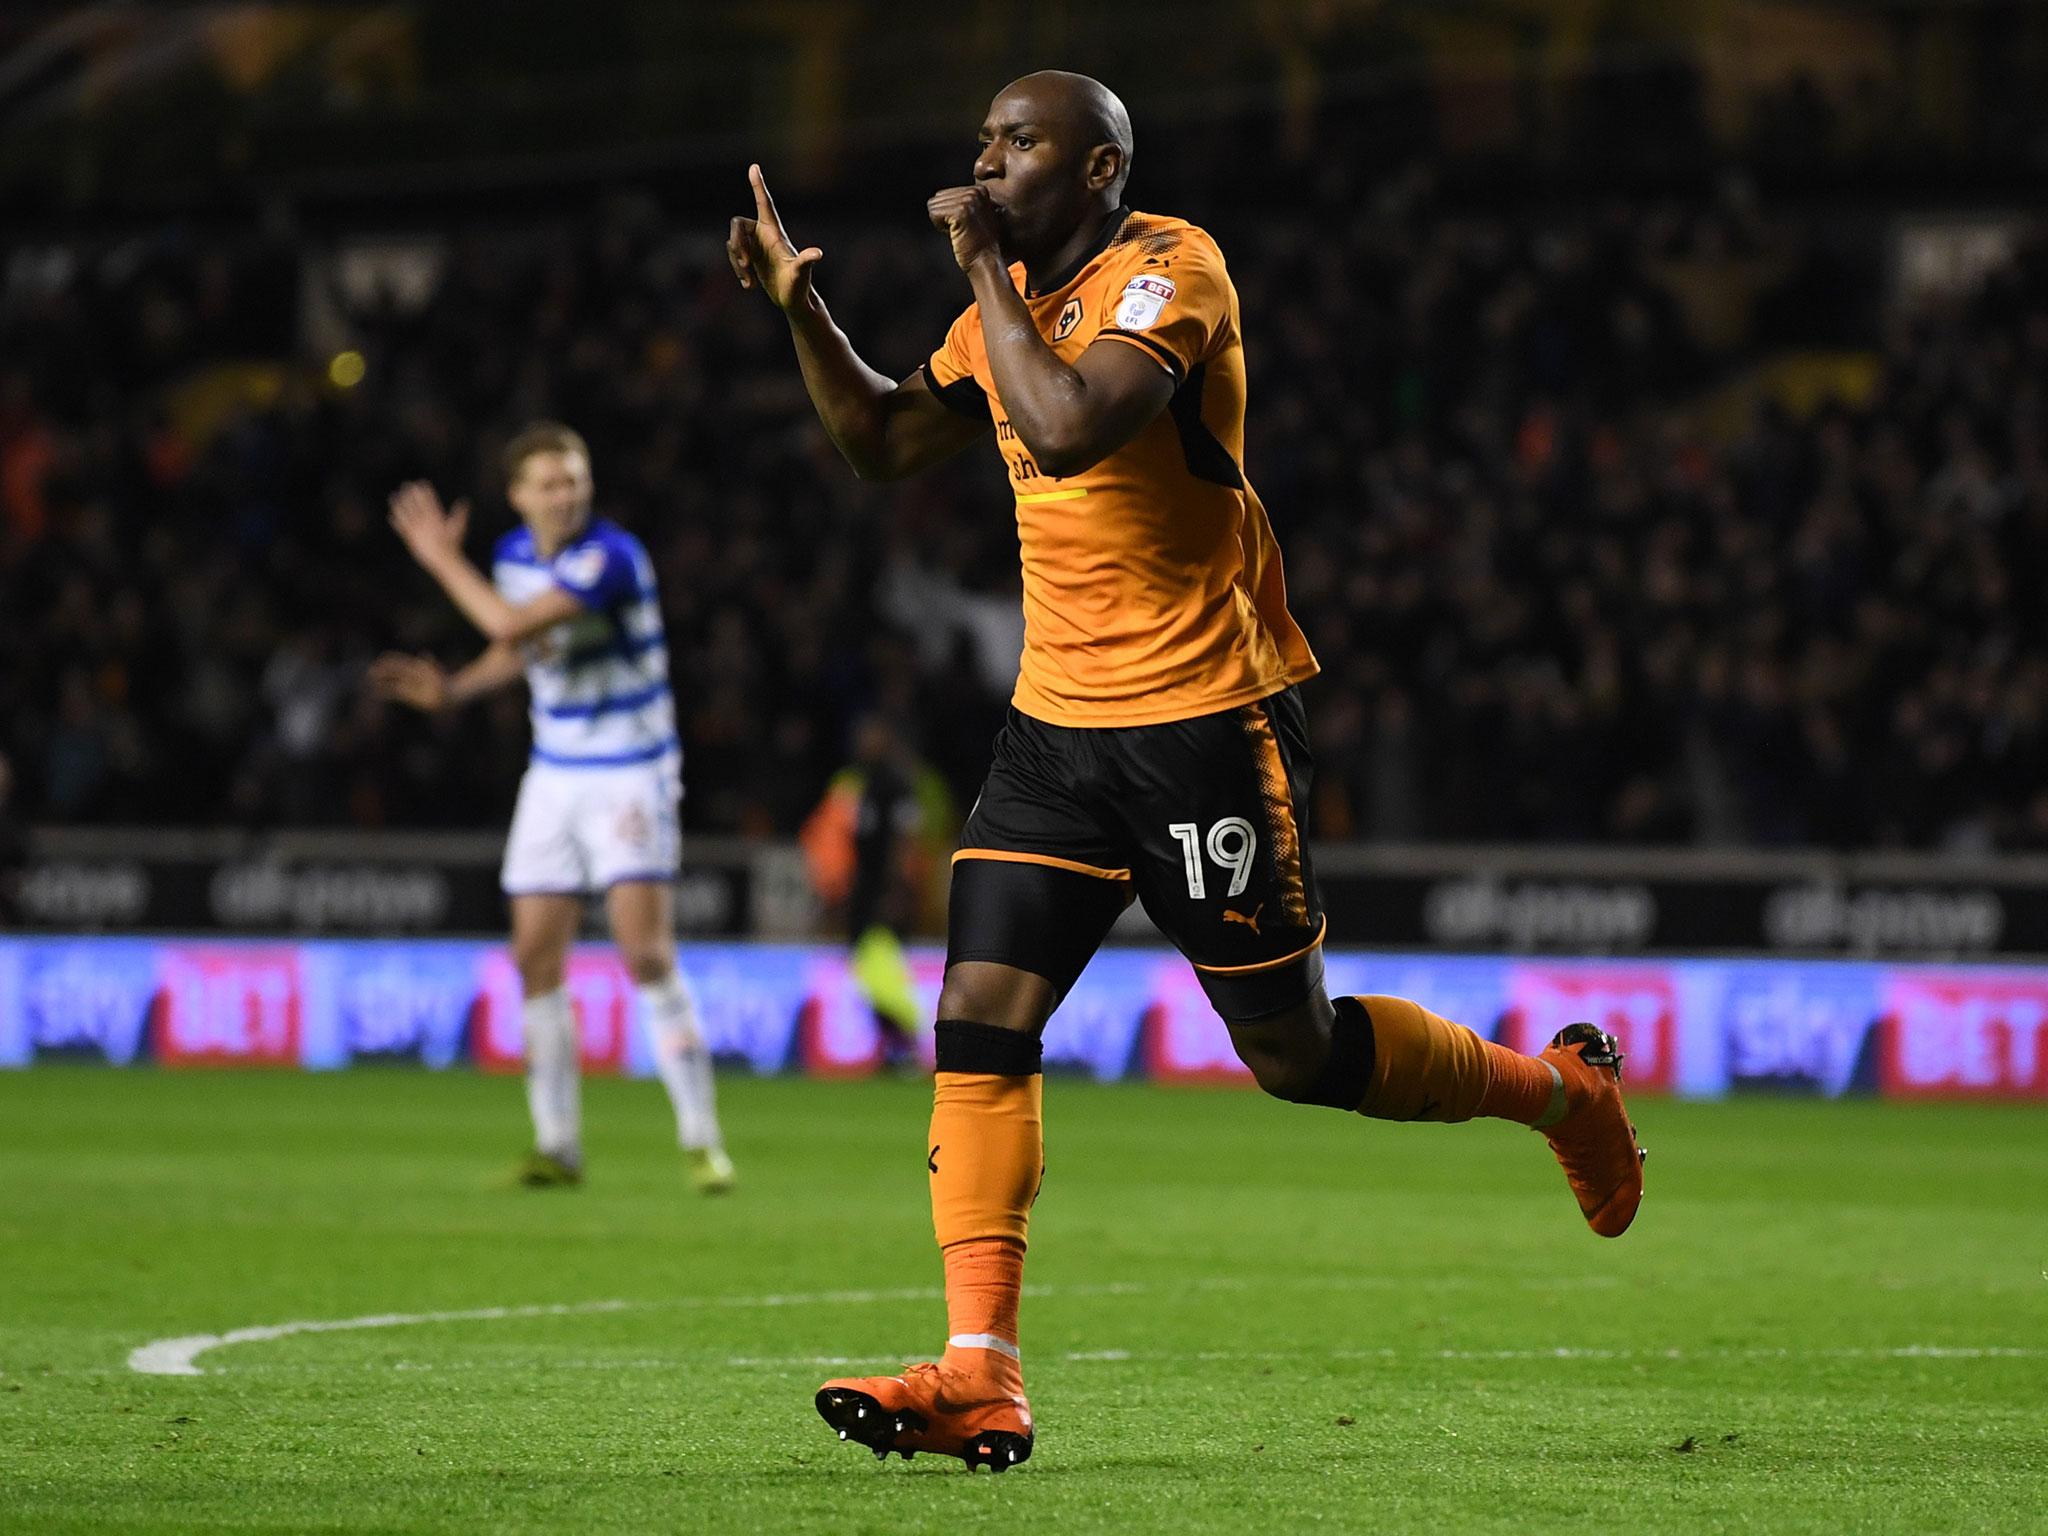 Benik Afobe to join Stoke in £12m deal - just days after moving to Wolves